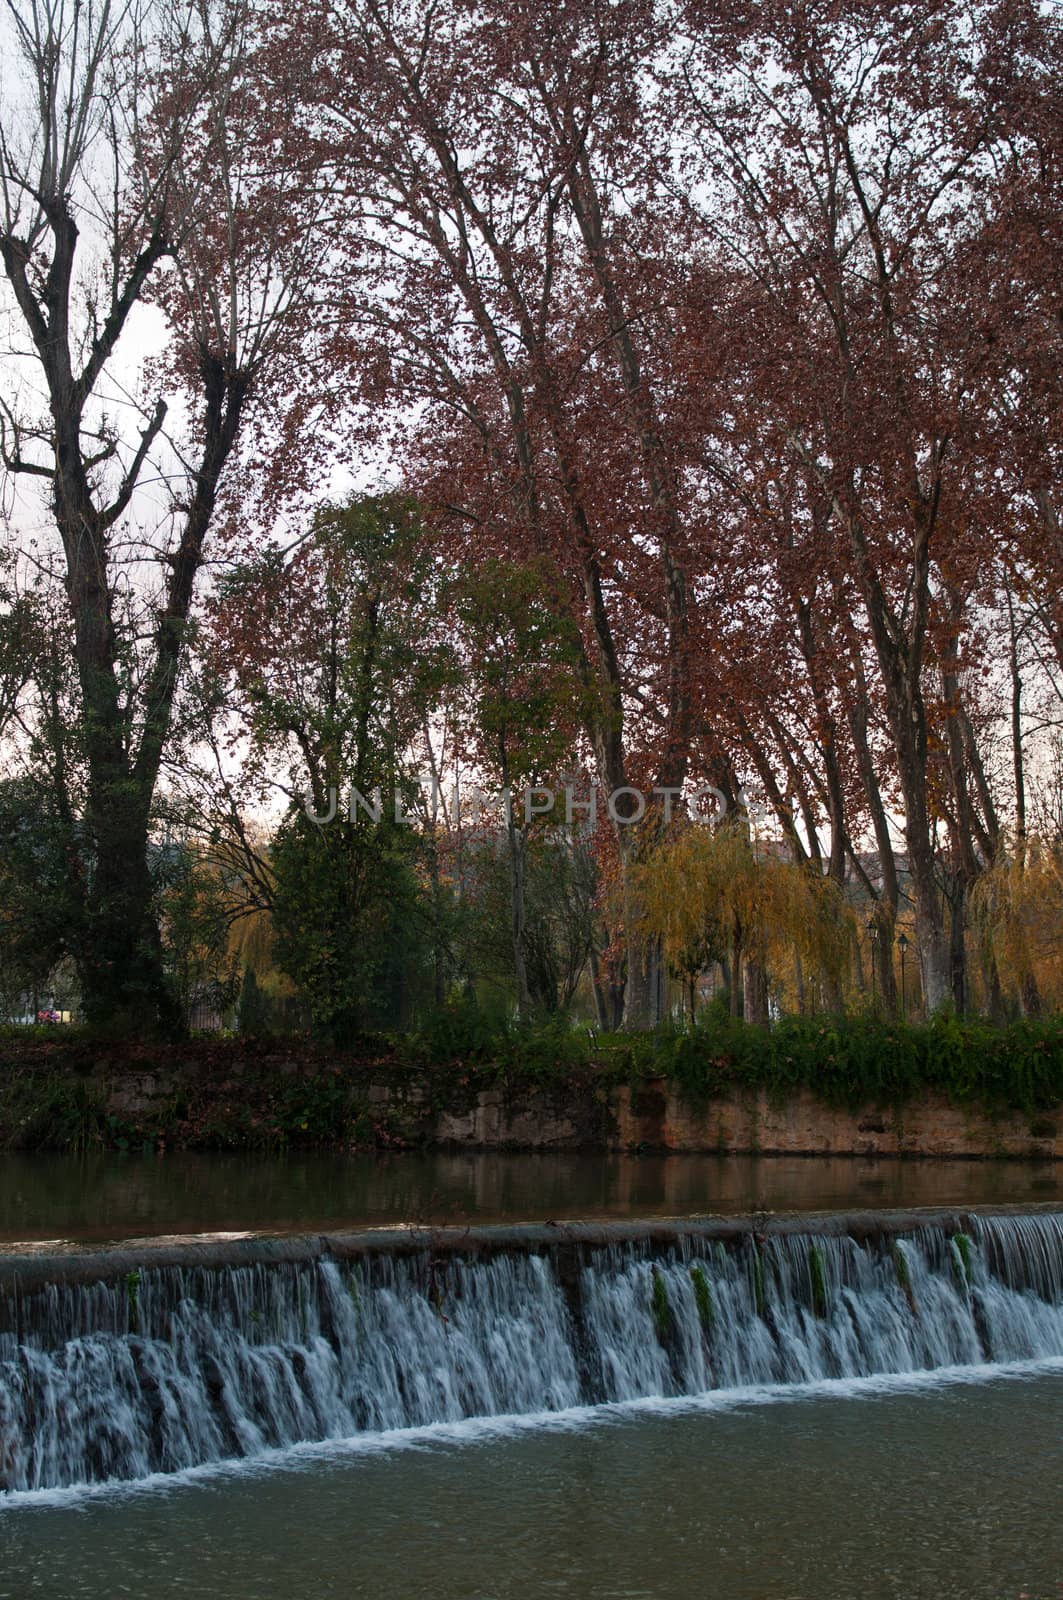 gorgeous Nab�o riverbank surrounded by trees in the city of Tomar, Portugal